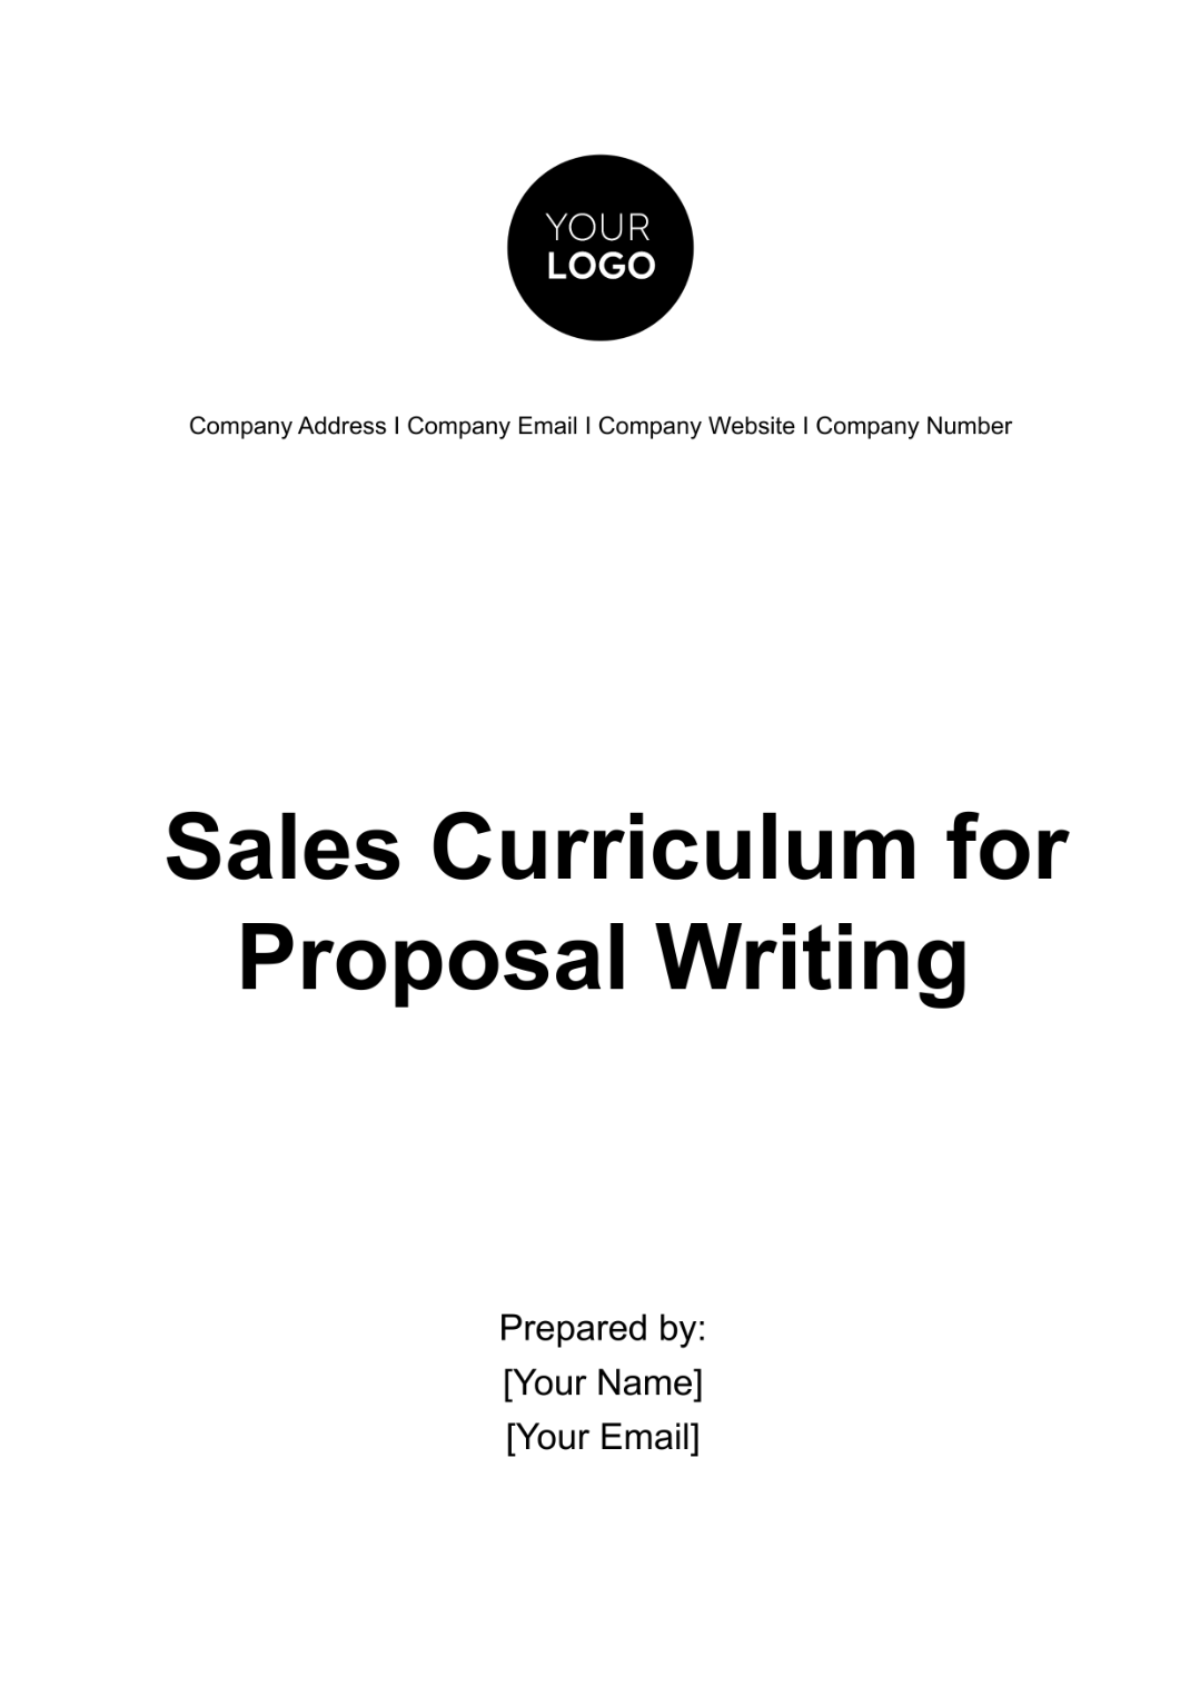 Sales Curriculum for Proposal Writing Template